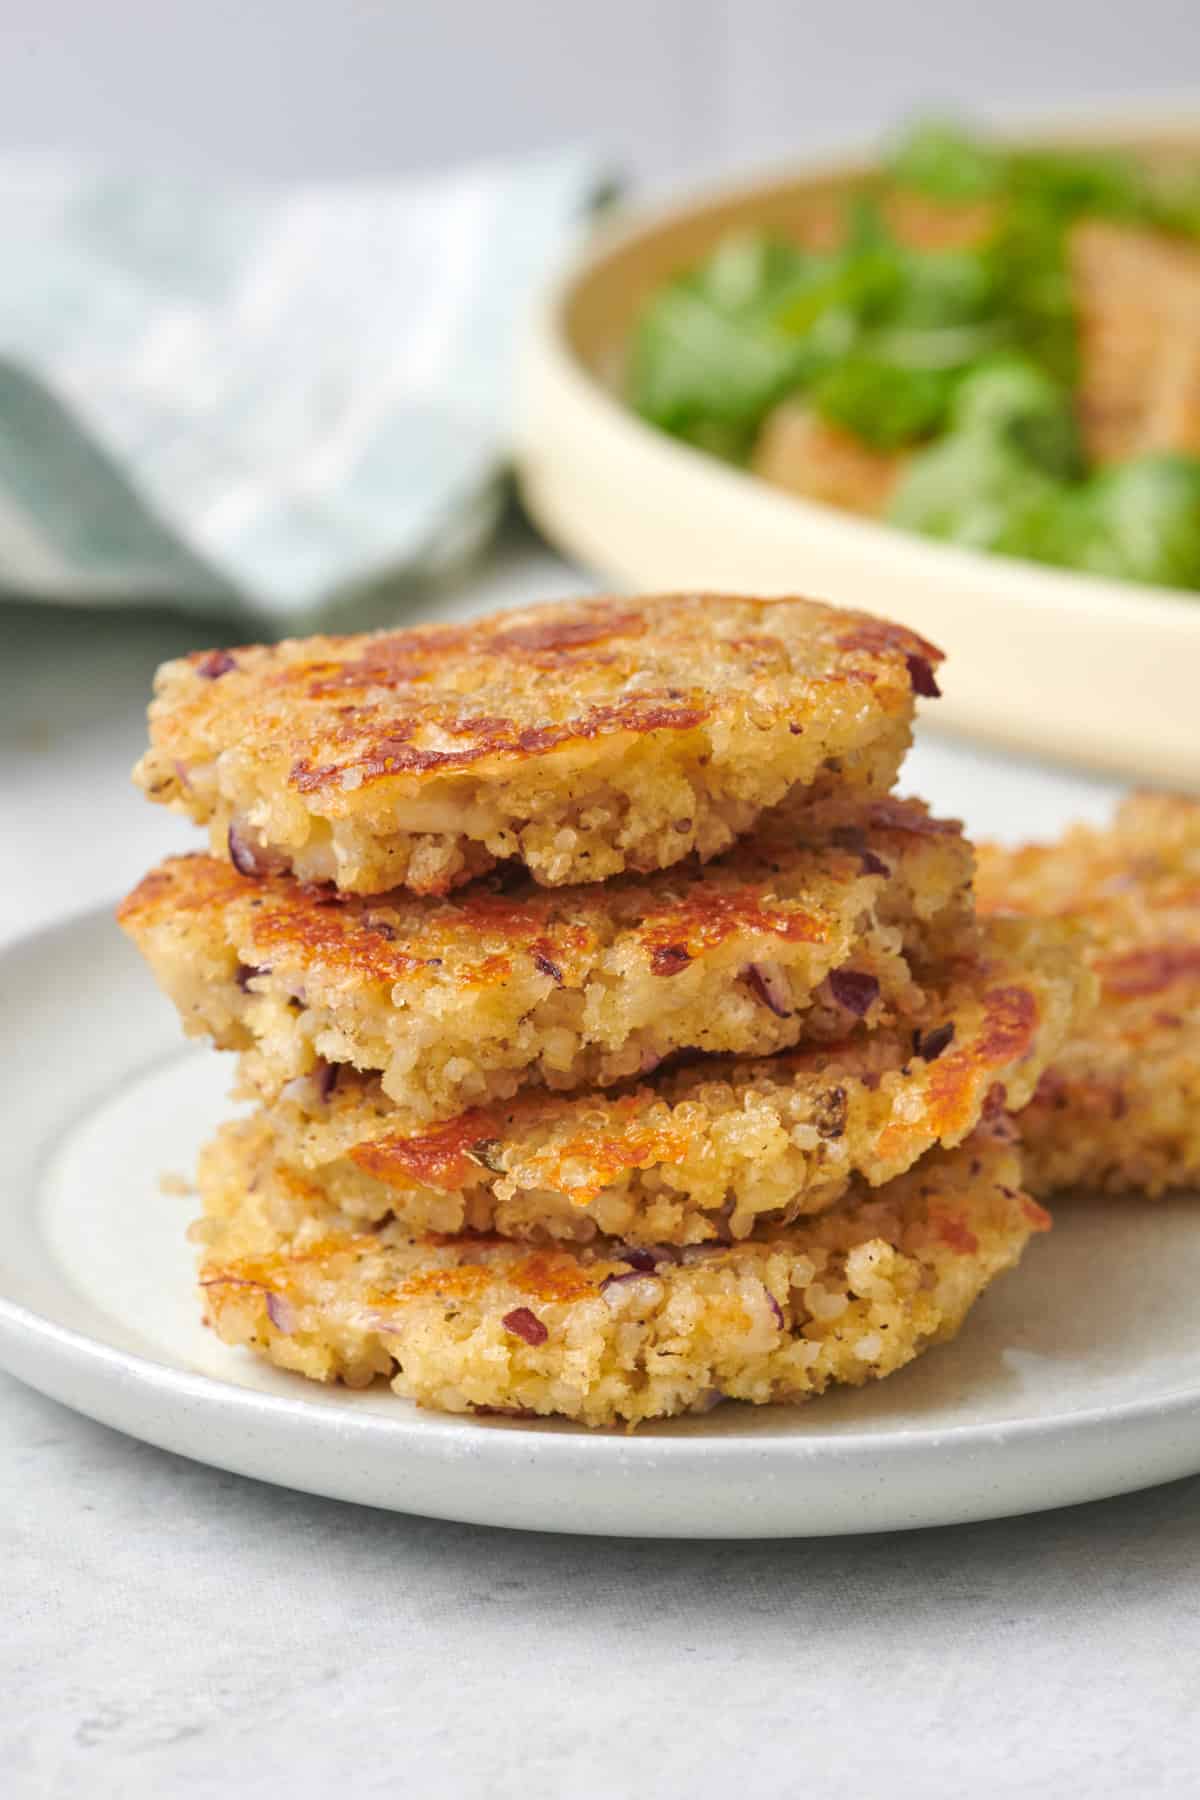 Quinoa patties stacked up on a small plate to show crispy crust.